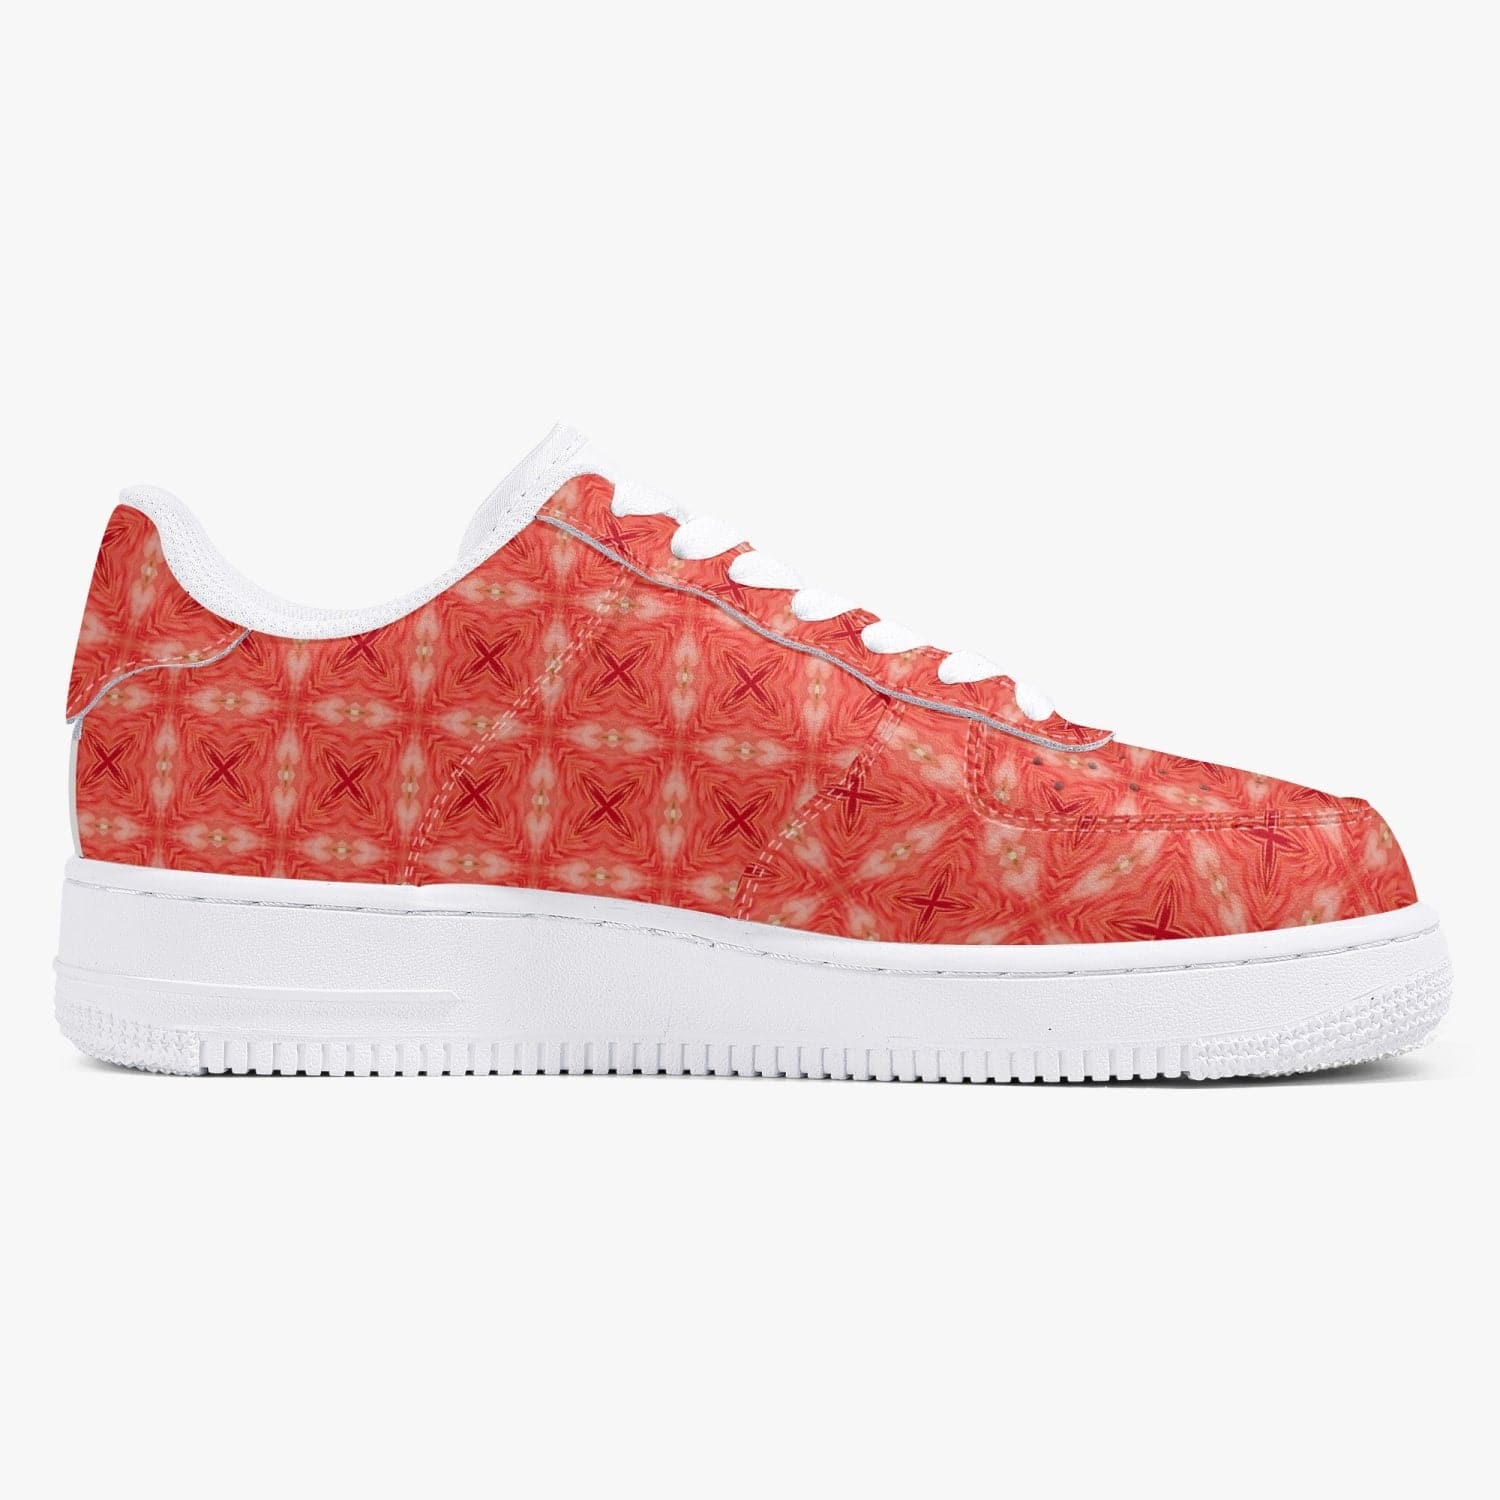 Red Buttercup crossed pattern Hot New Low-Top Leather Sports Sneakers for women, by Sensus Studio Design